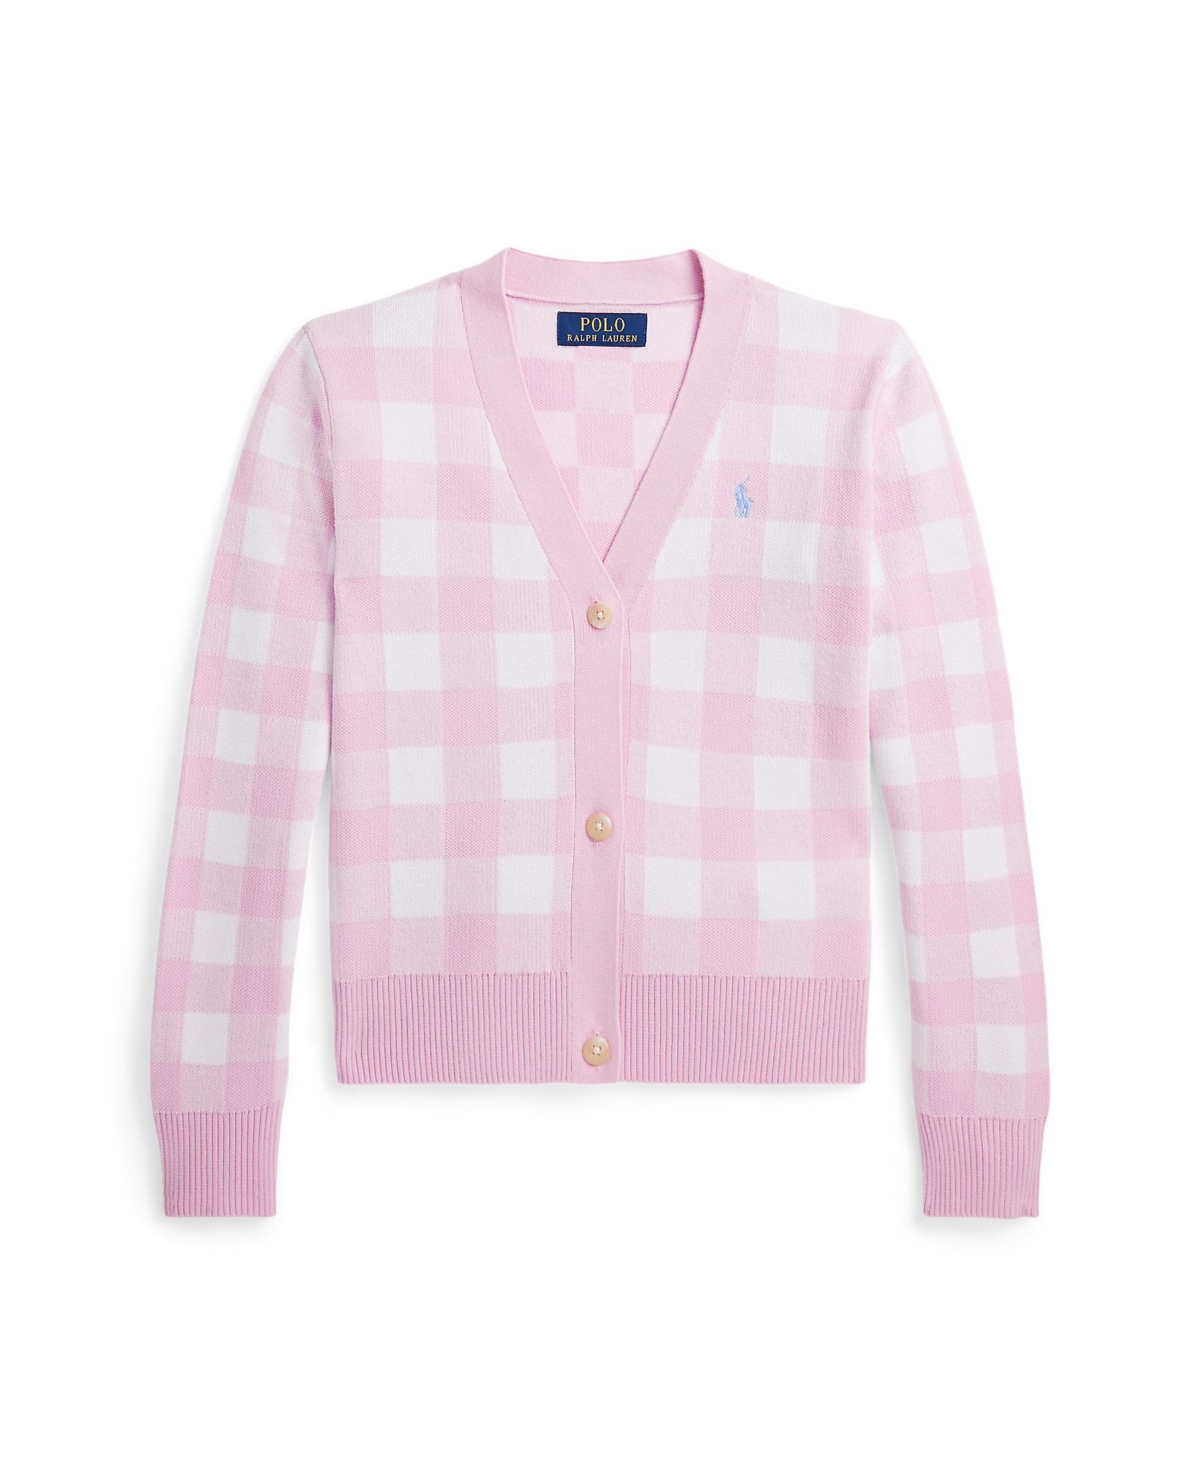 Polo Ralph Lauren Kids' Big Girls Gingham Boxy Cotton Cardigan Sweater In Pink Multi With Blue Hyacinth